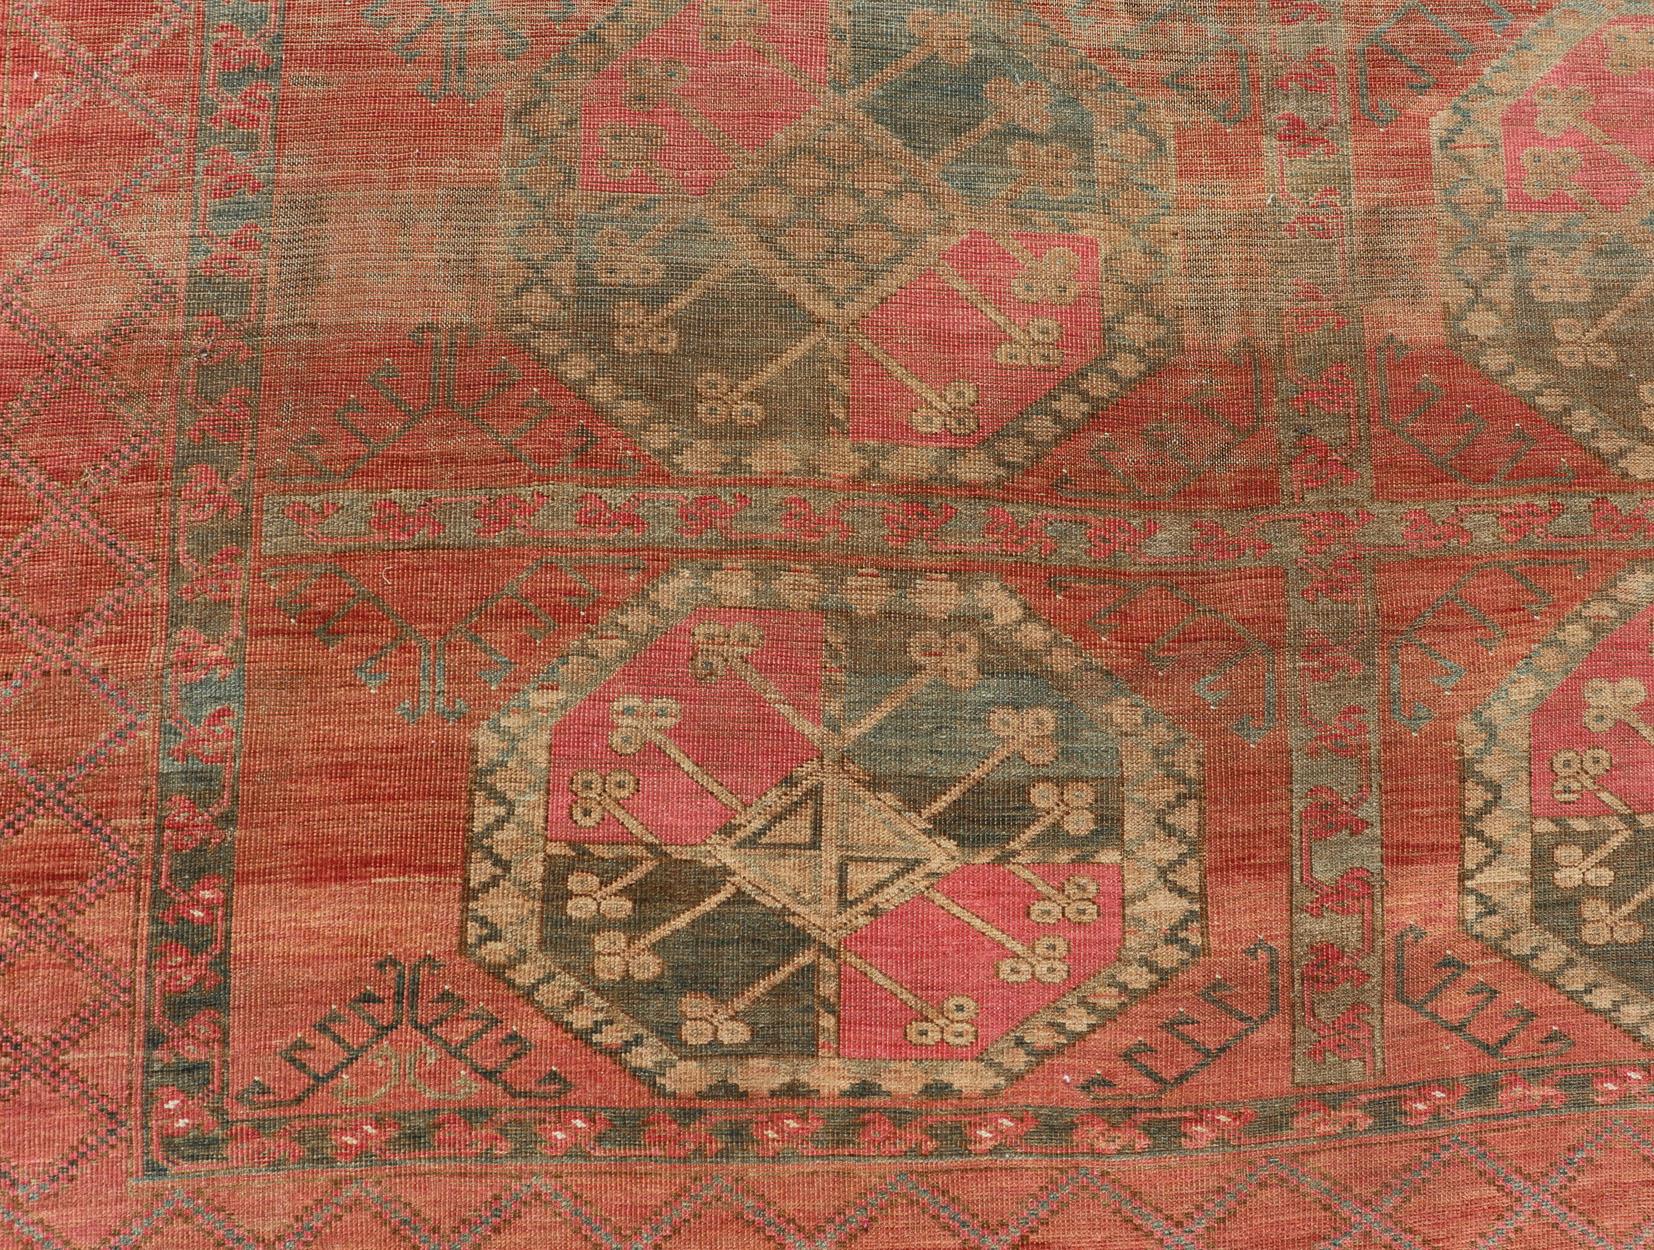 Large Turkomen Ersari Rug with All-Over Gul Design in Tan, Coral, and Brown In Good Condition For Sale In Atlanta, GA